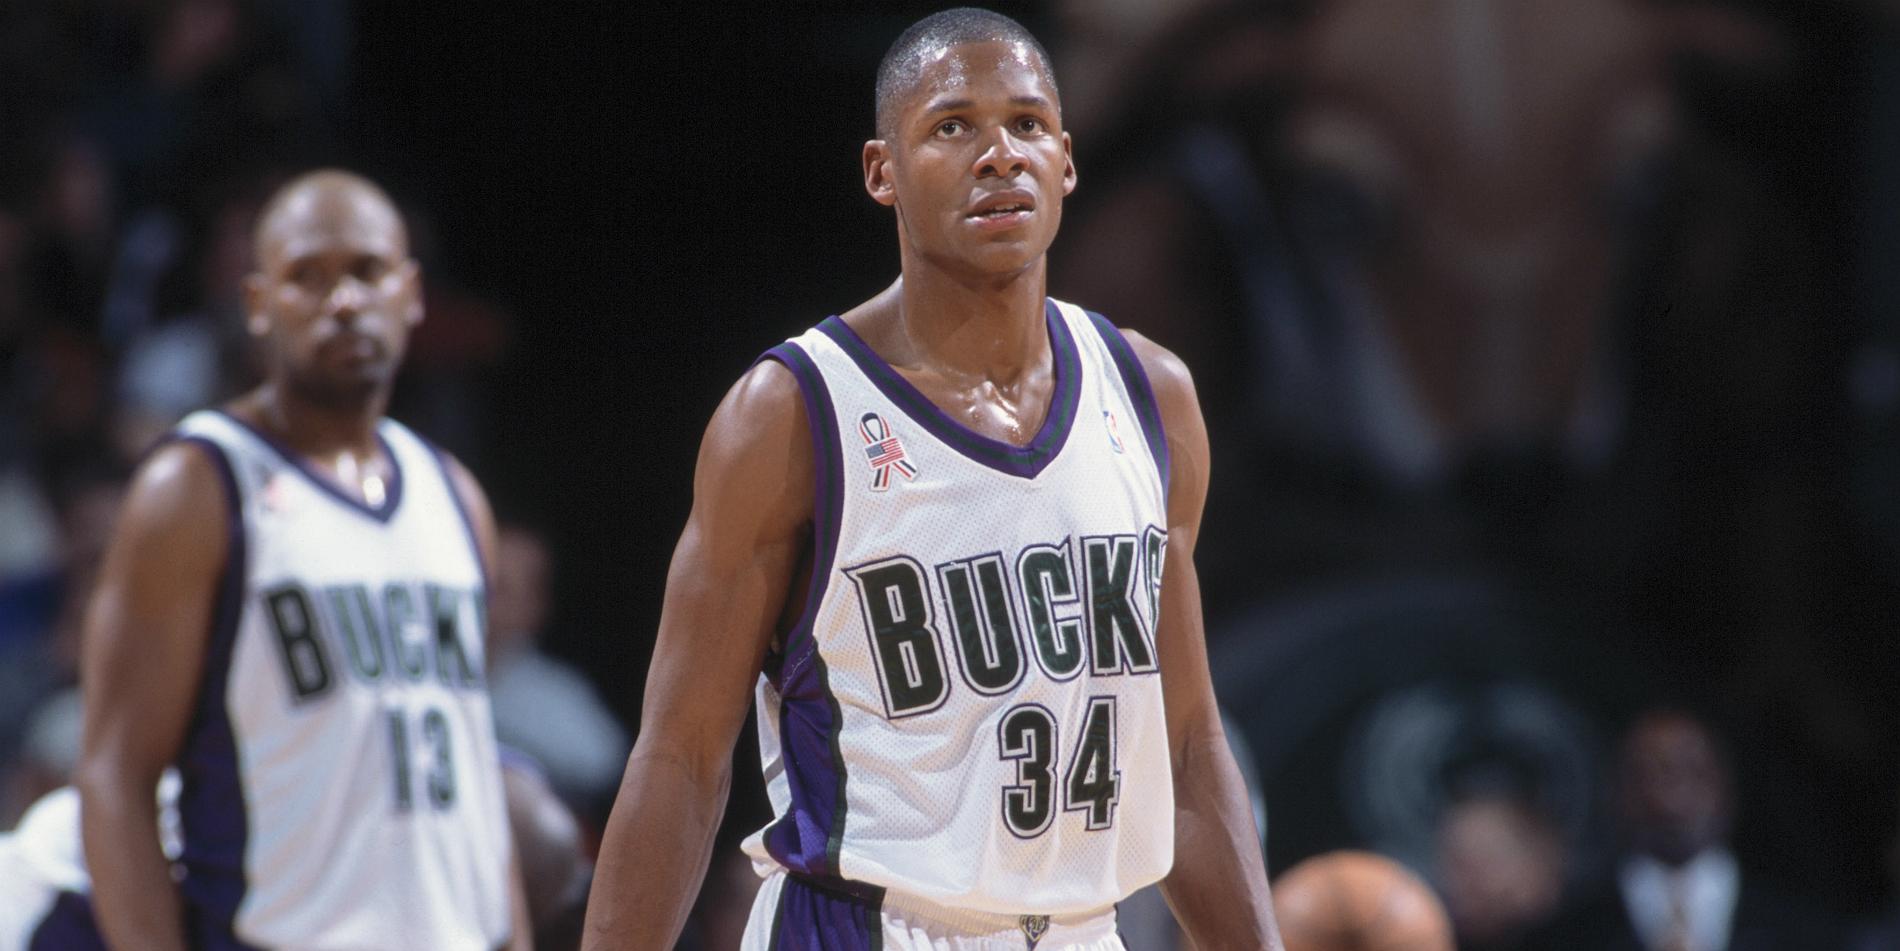 Happy Birthday, Ray Allen! Celebrate by taking a look back at his incredible career:

WATCH »  